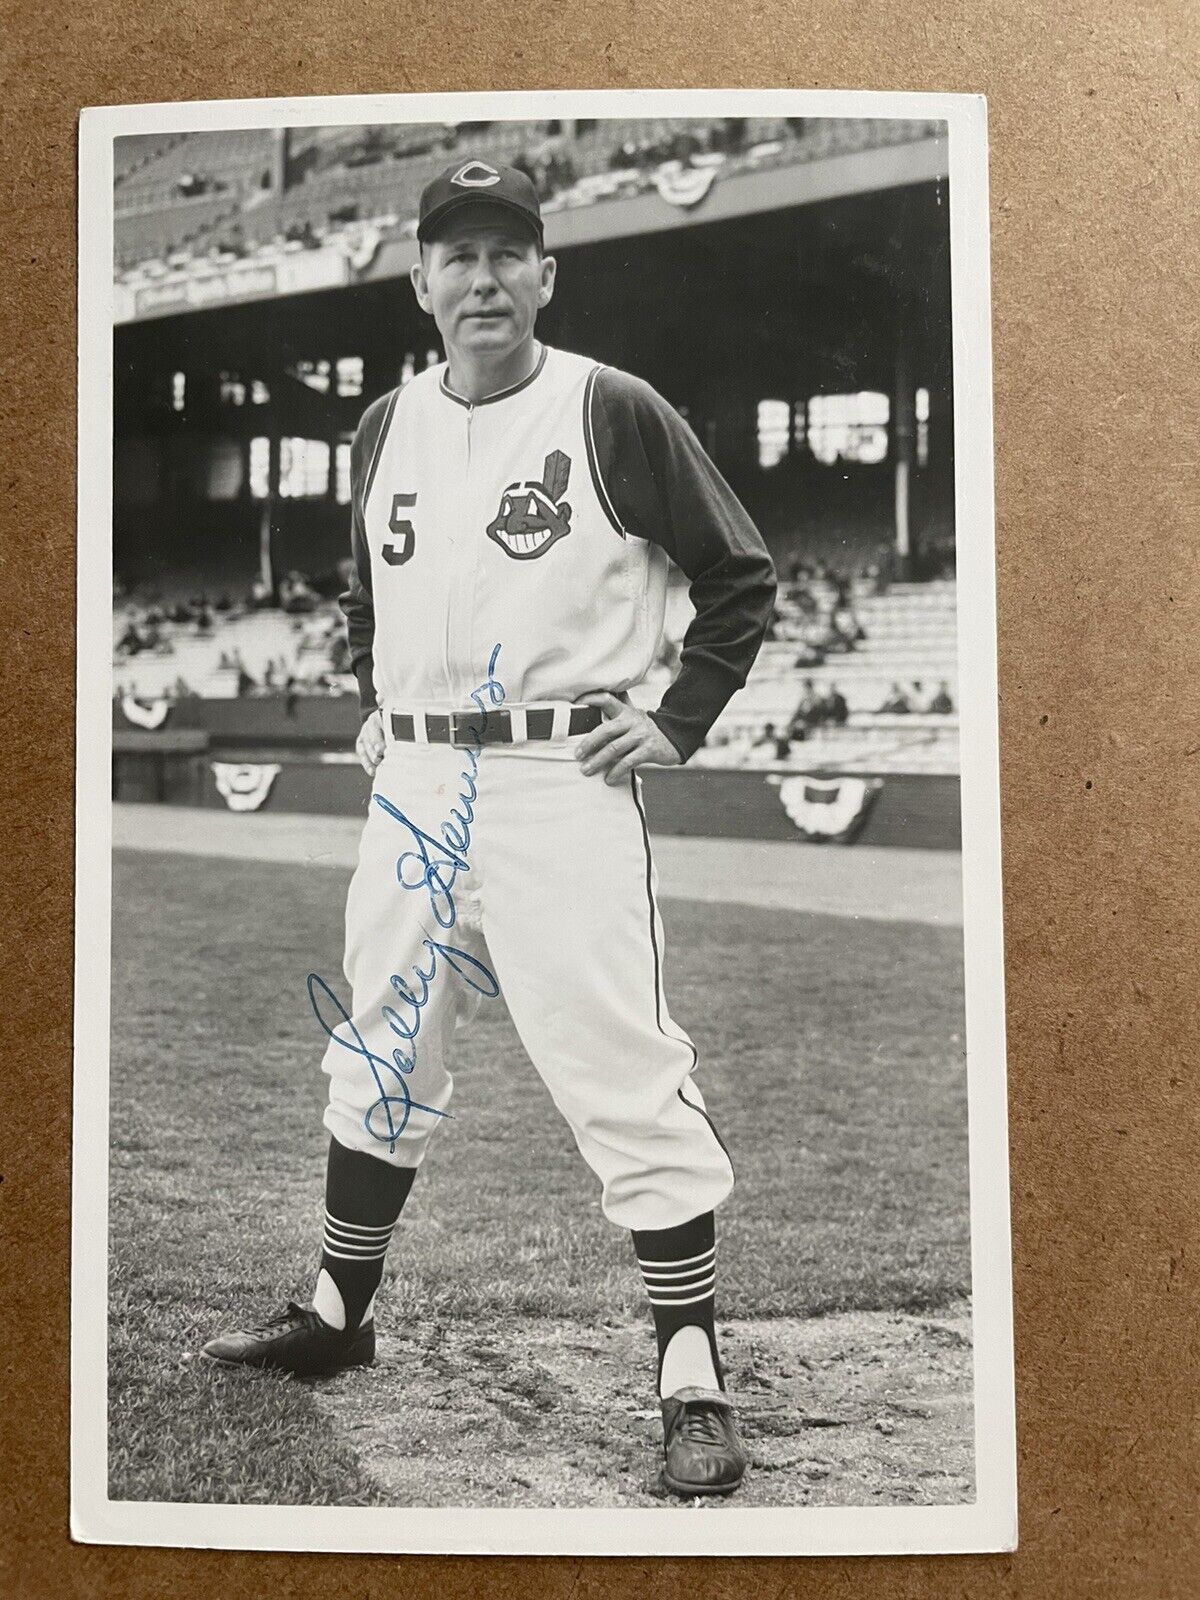 Solly Hemus Cleveland Indians Autographed Postcard